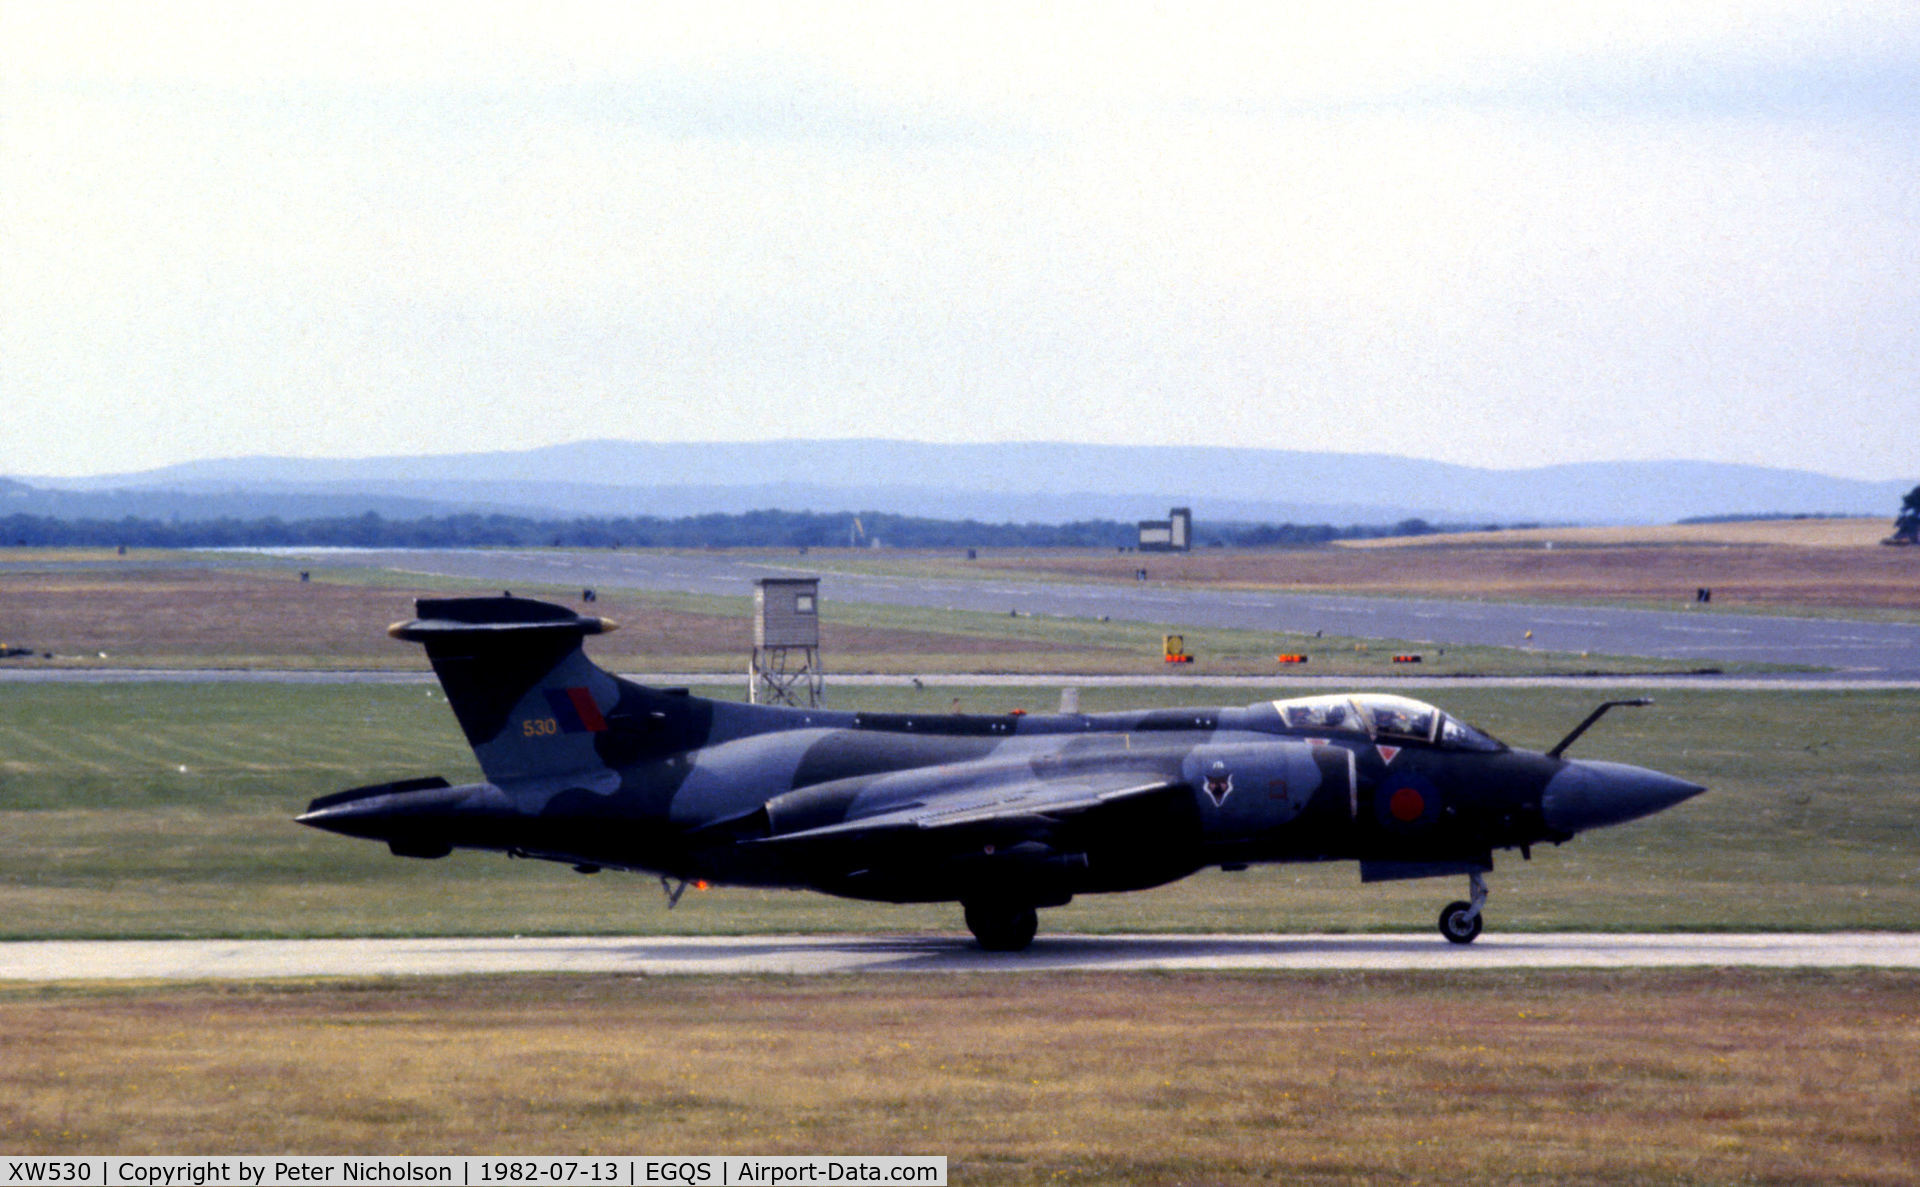 XW530, 1970 Hawker Siddeley Buccaneer S.2B C/N B3-06-69, Buccaneer S.2B of 12 Squadron awaiting clearance to join the active runway at RAF Lossiemouth in the Summer of 1982.